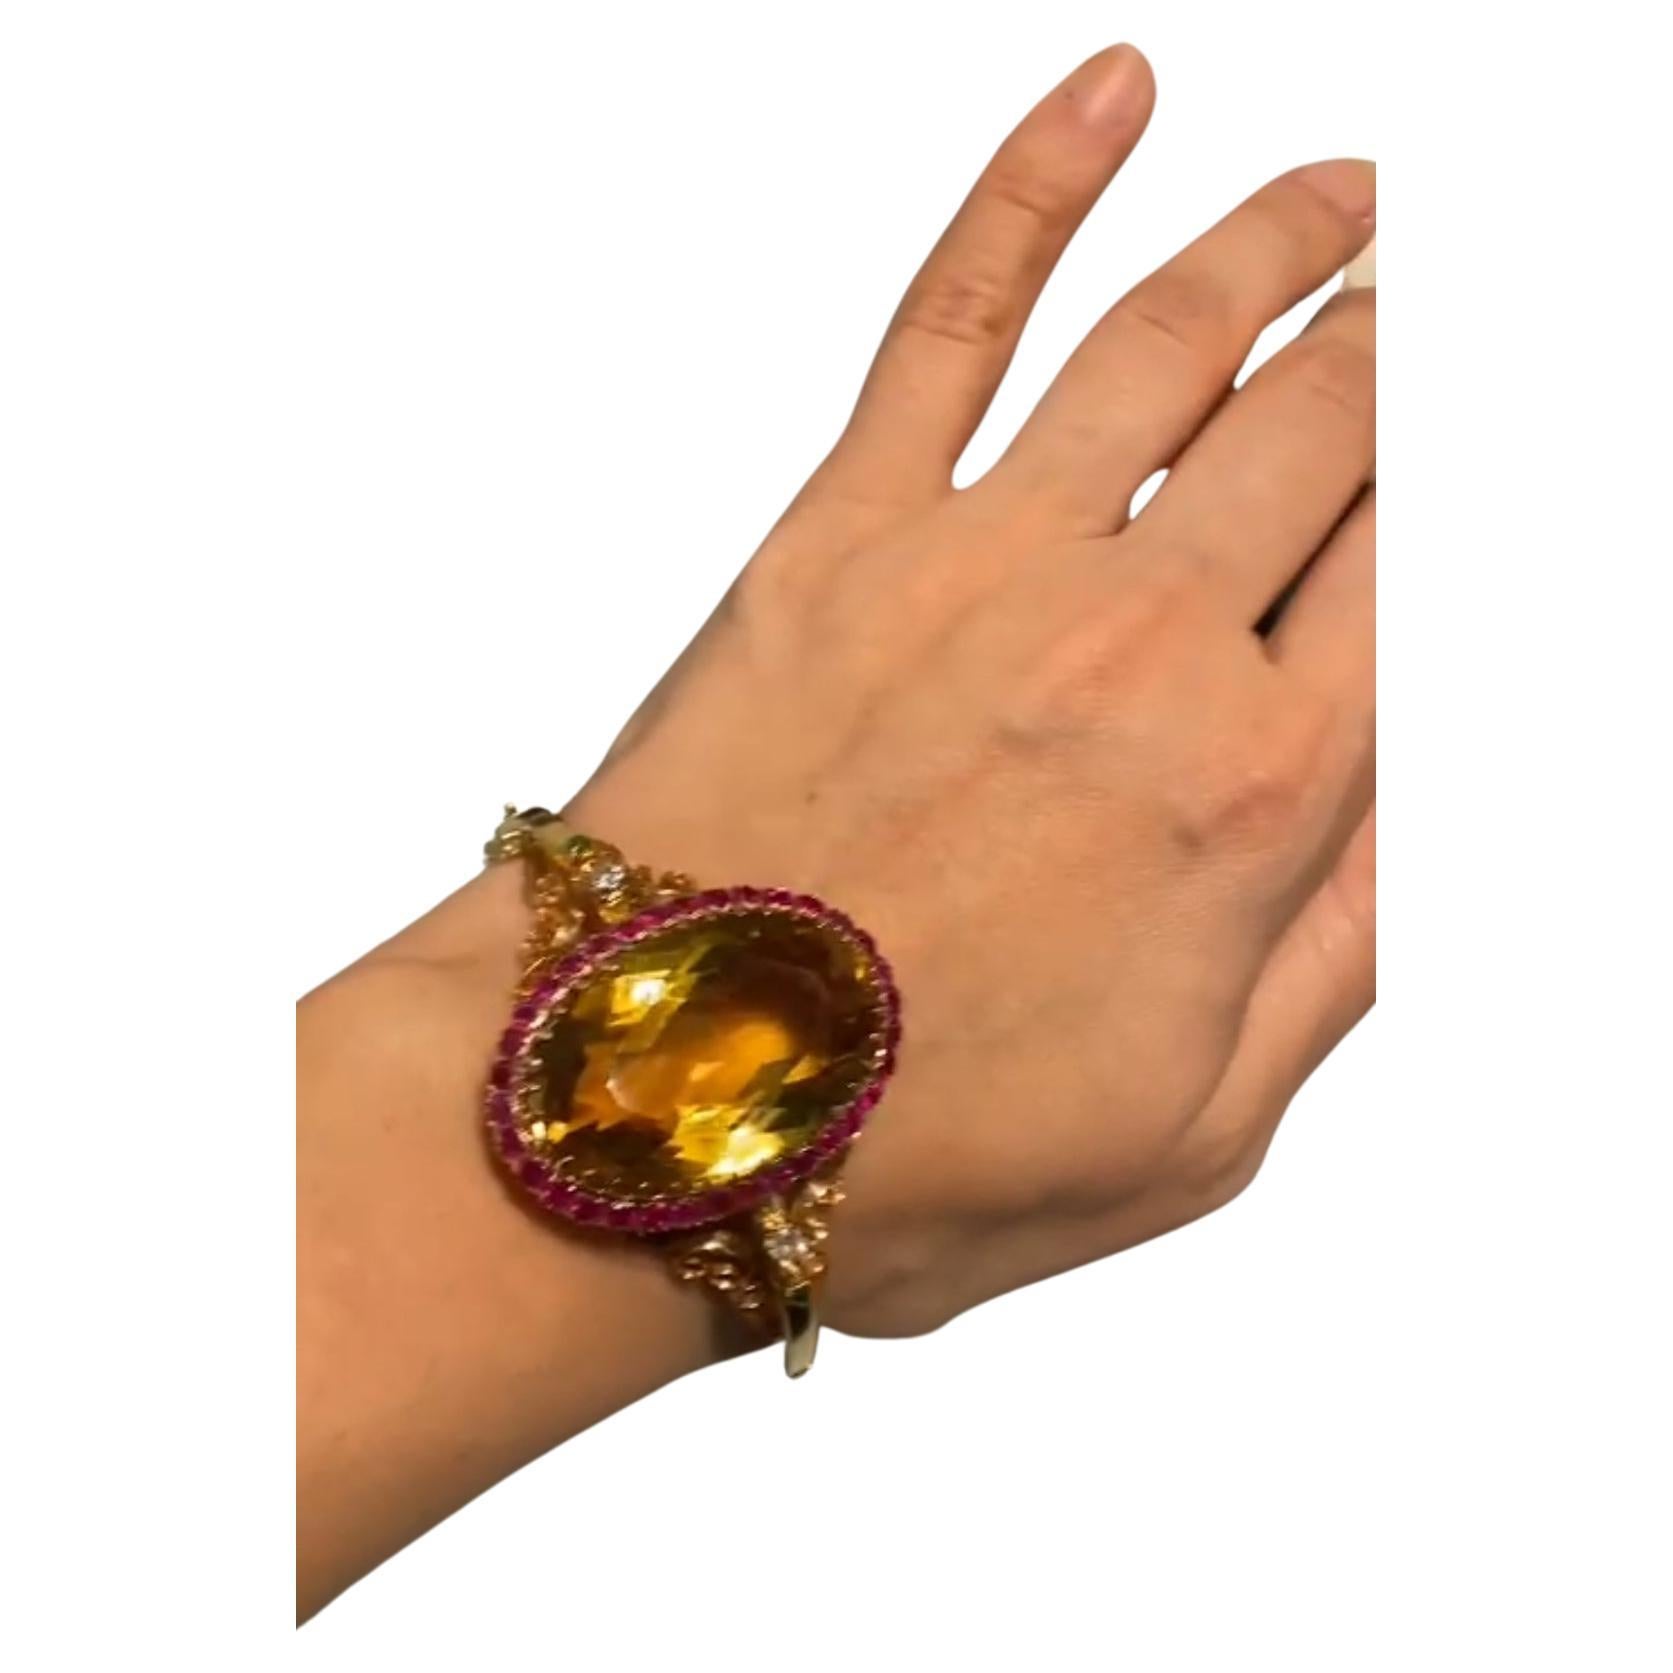 Antique 18k gold bracelet centered with large citrine stone with a diameter of 37mm×27mm estimate weight 70 carats flawless in excellent facets and spark flanked with natural red rubies and 2 old diamonds and green emeralds made in europe